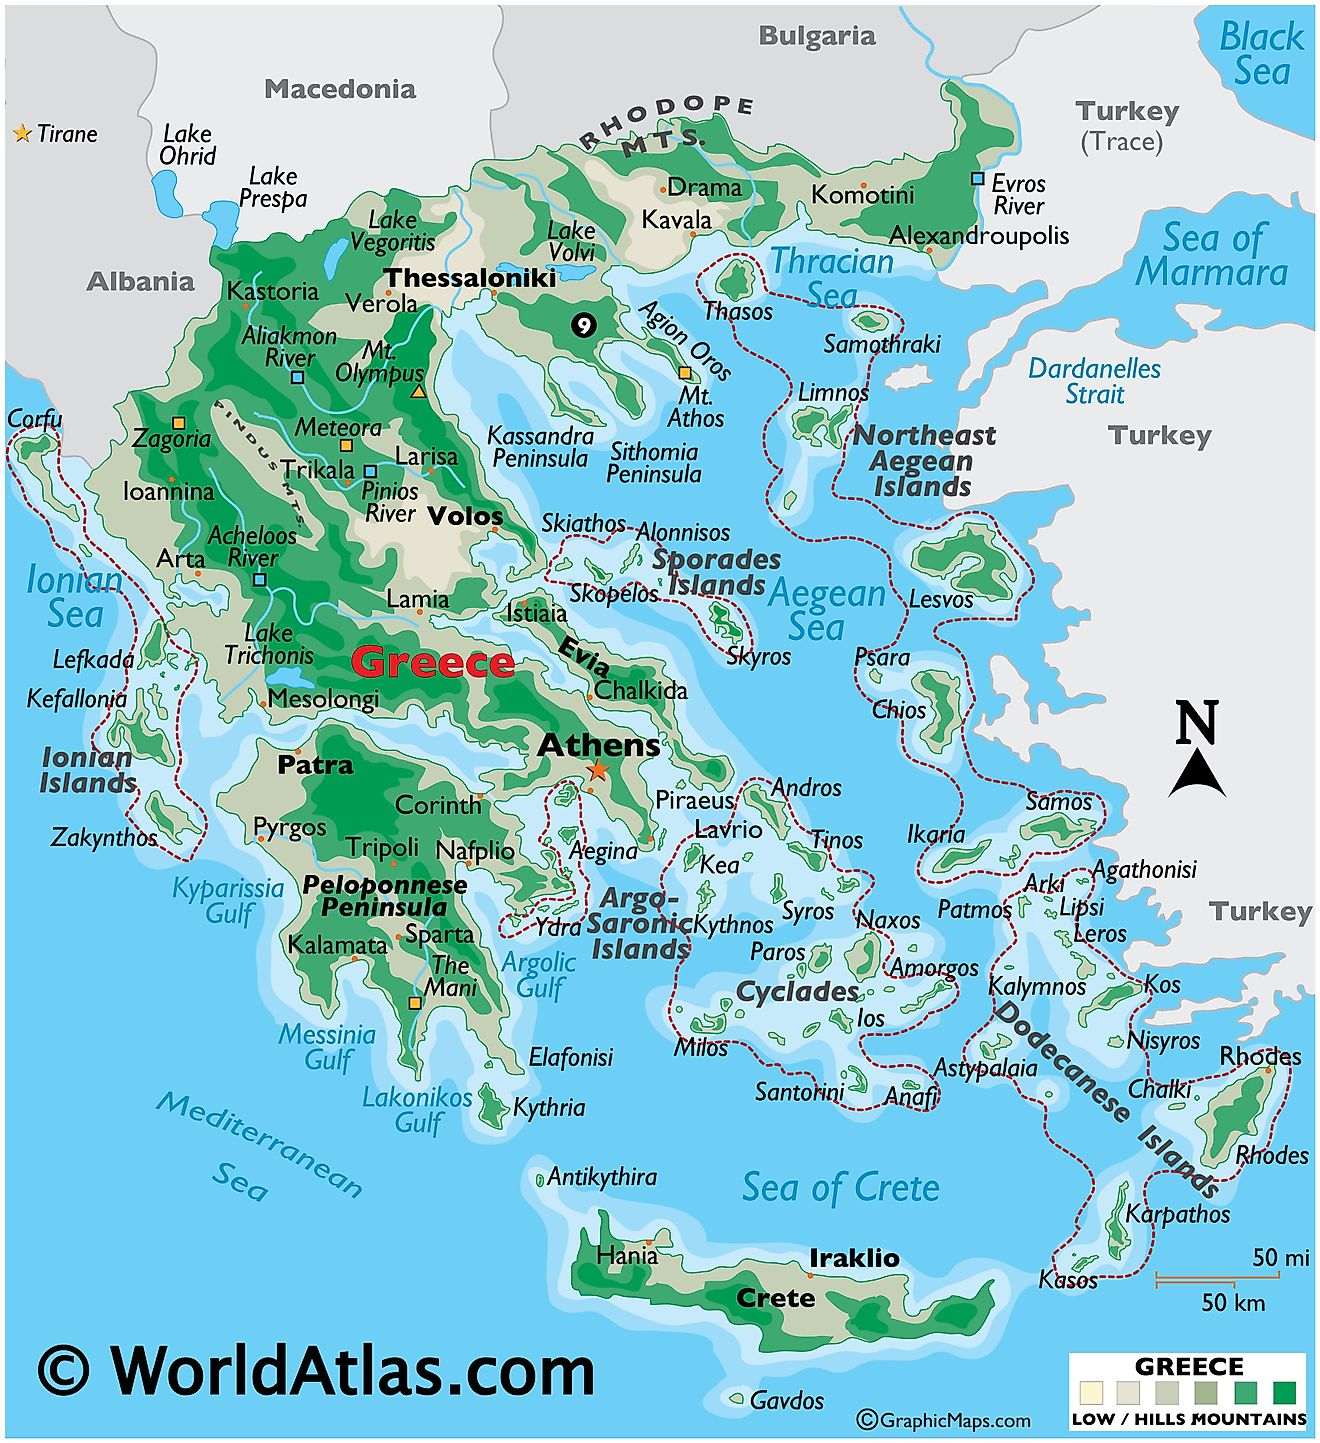 Physical Map of the Greece showing terrain, mountain ranges, islands, Peloponnese Peninsula, extreme points, major rivers, important cities, international boundaries, etc.